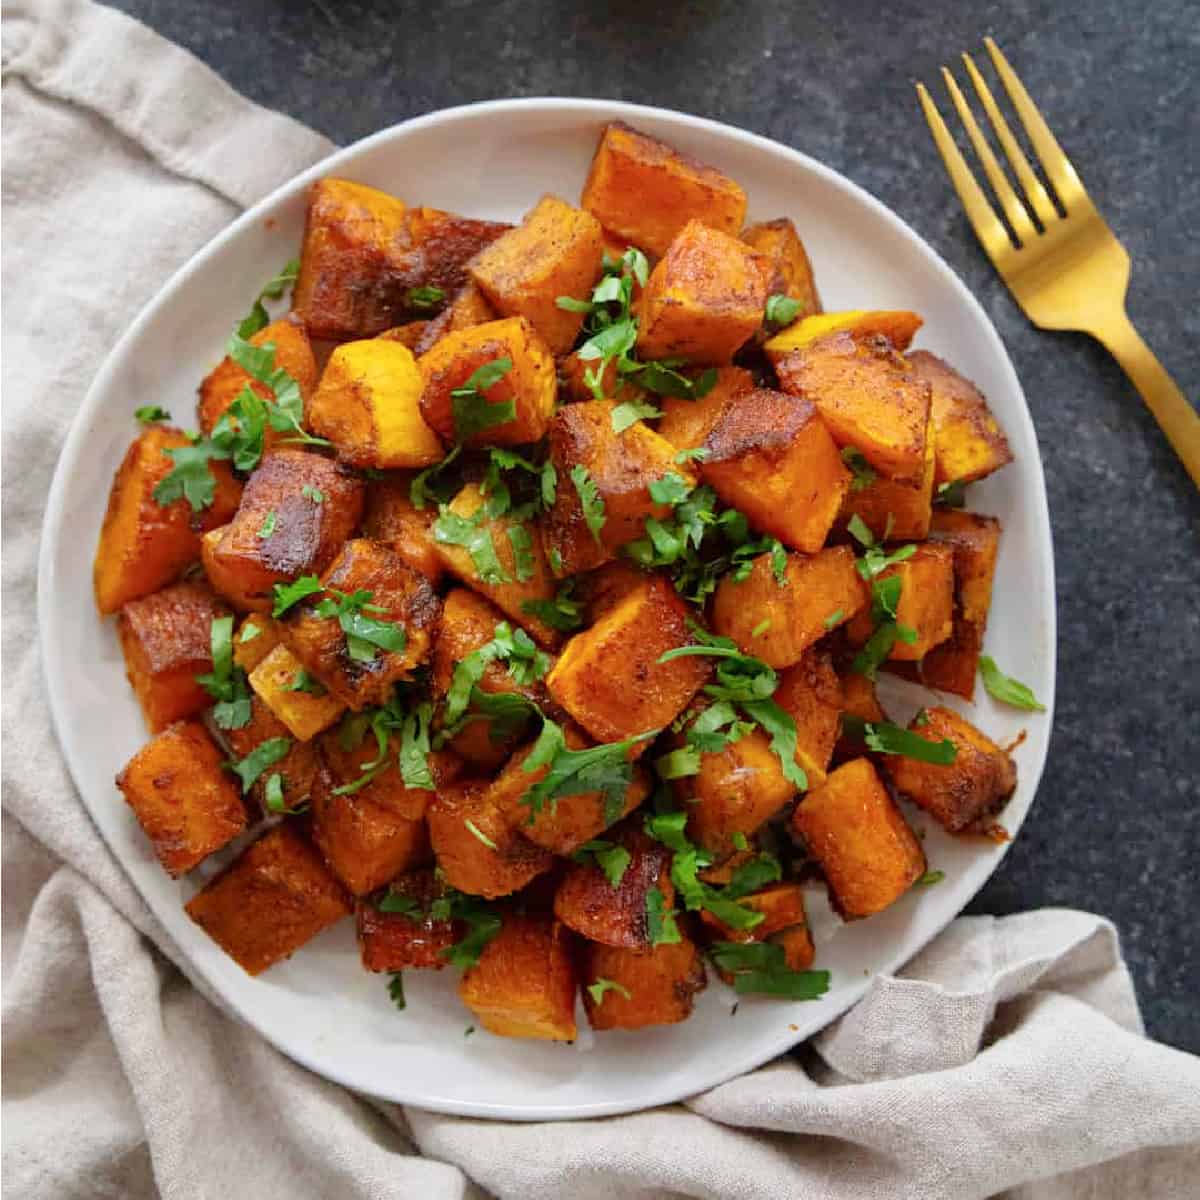 Roasted butternut squash makes an elegant side dish for any occasion. Butternut squash cubes are tossed with olive oil and warm spices and roasted until caramelized, then topped with honey, lemon and cilantro.
